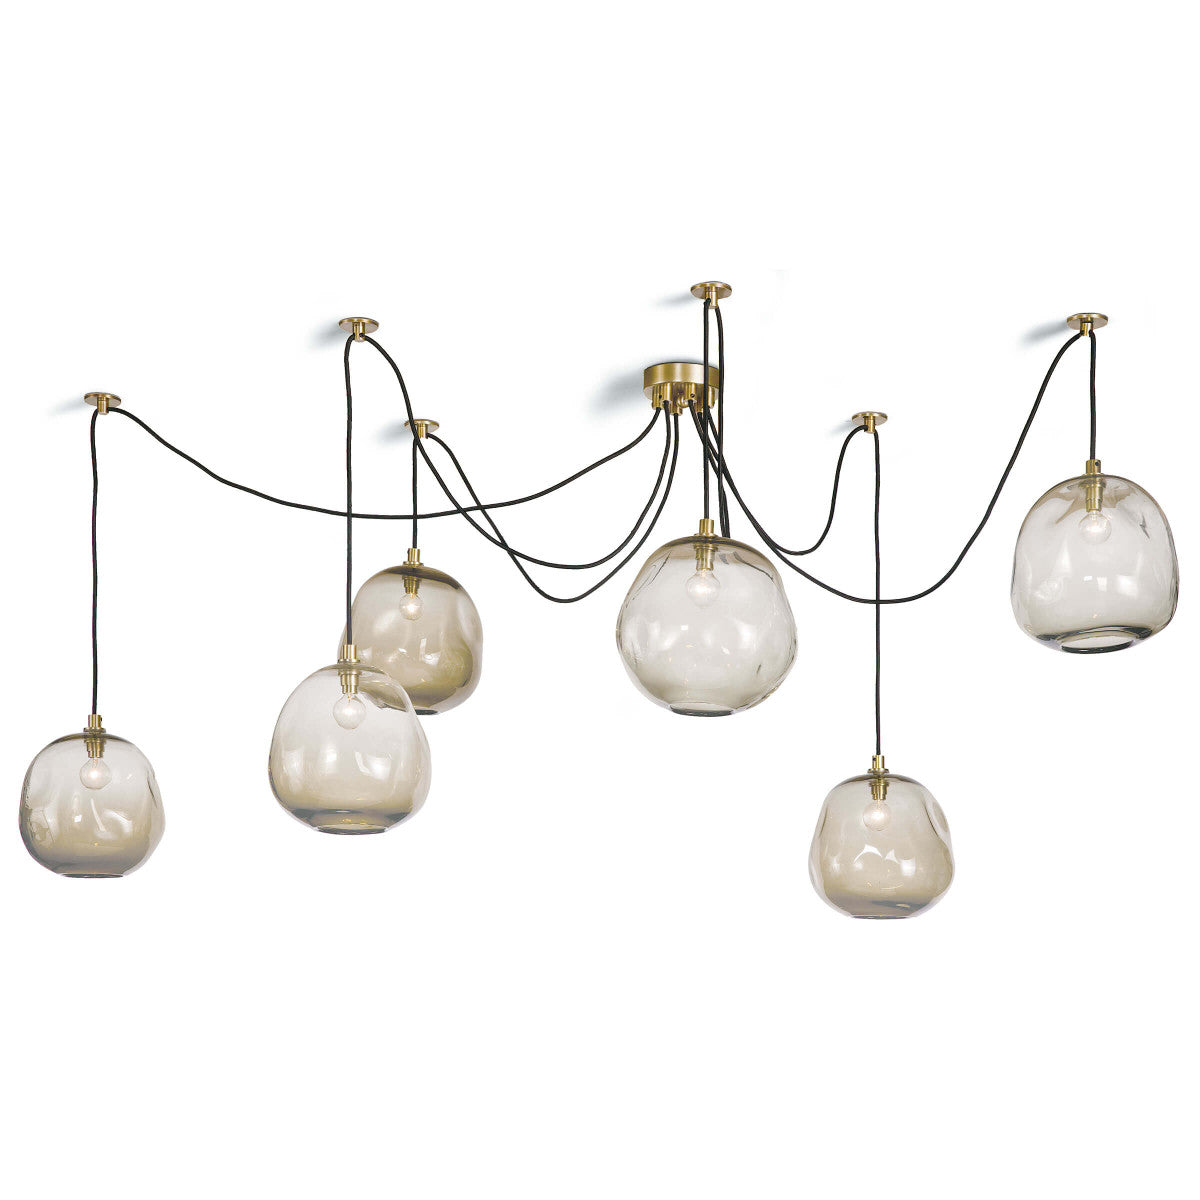 small chandelier with spidered hanging glass orbs